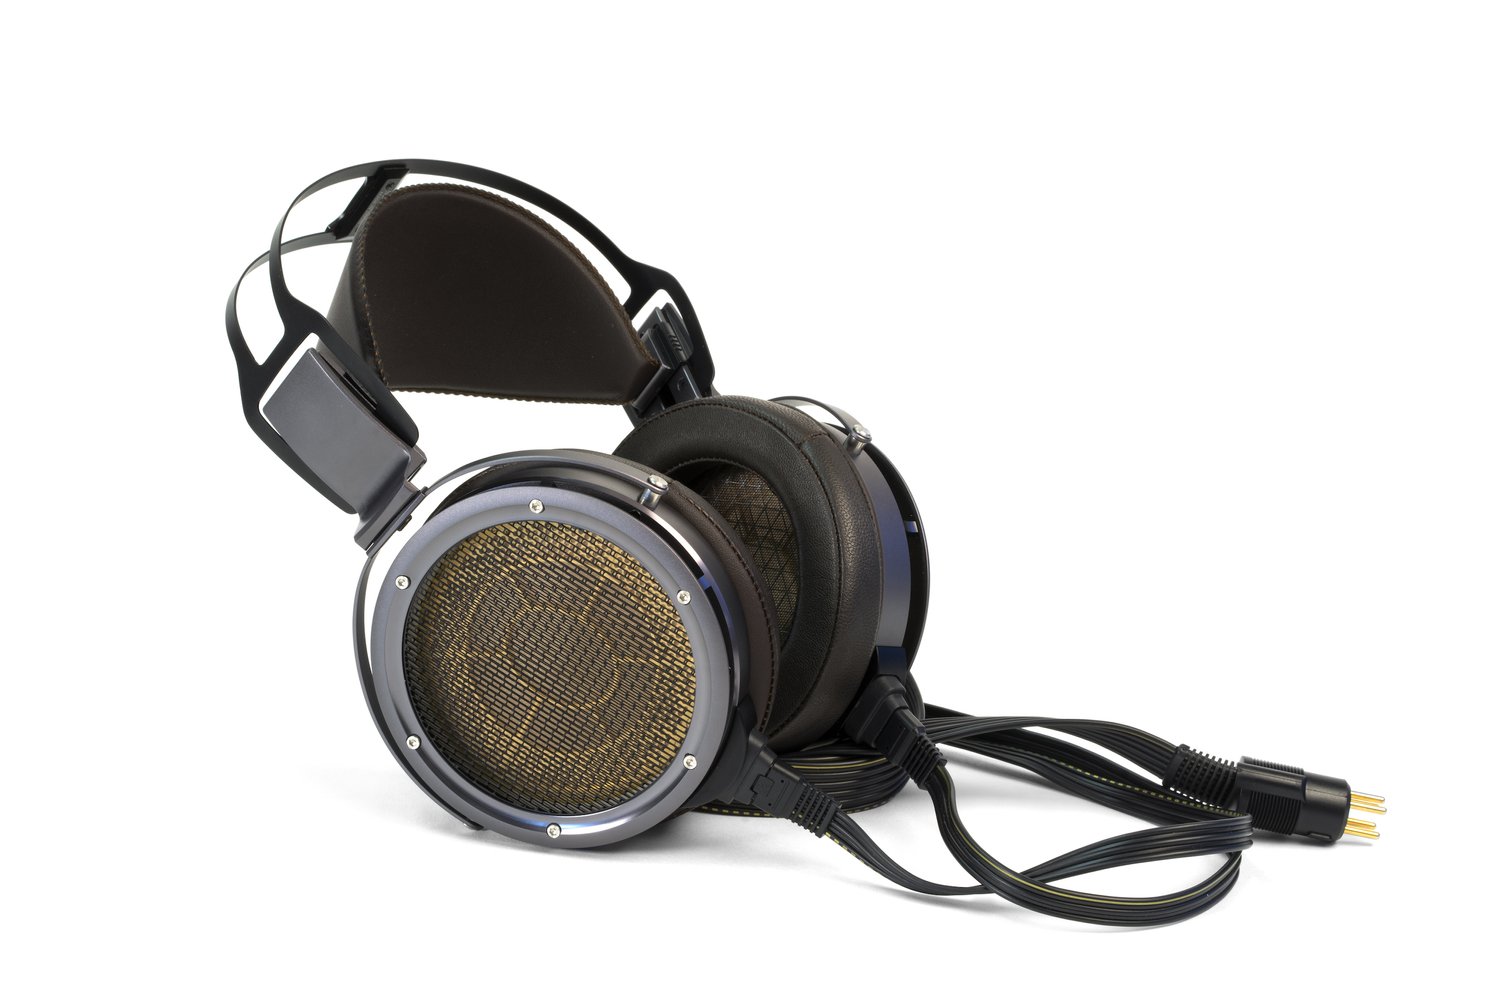 Fidelis welcomes the iconic brand Stax to our headphone offerings!